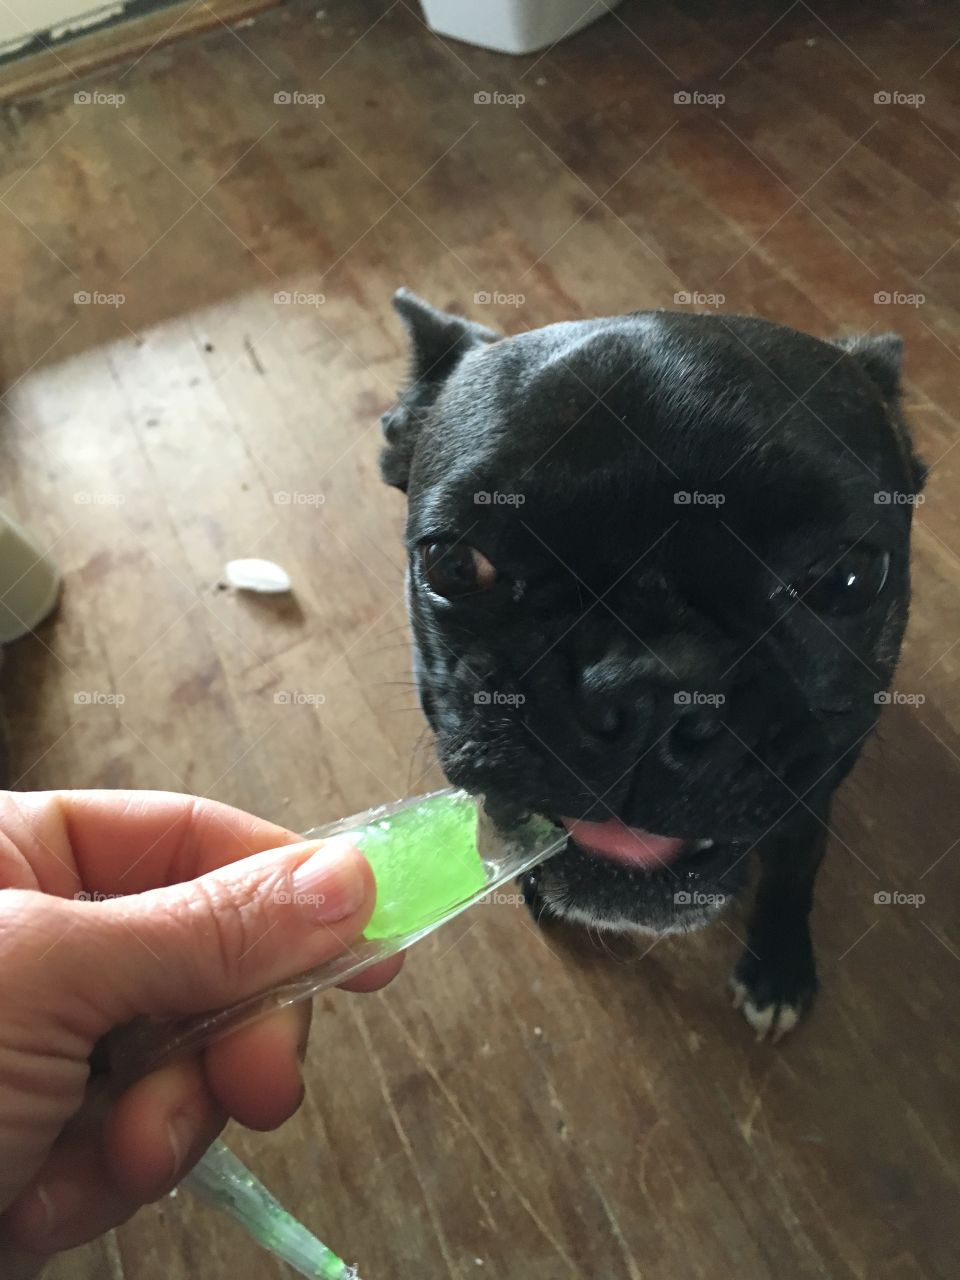 Norman loves Popsicles for his treat. Doesn't matter the color or flavor he just loves them all 😊